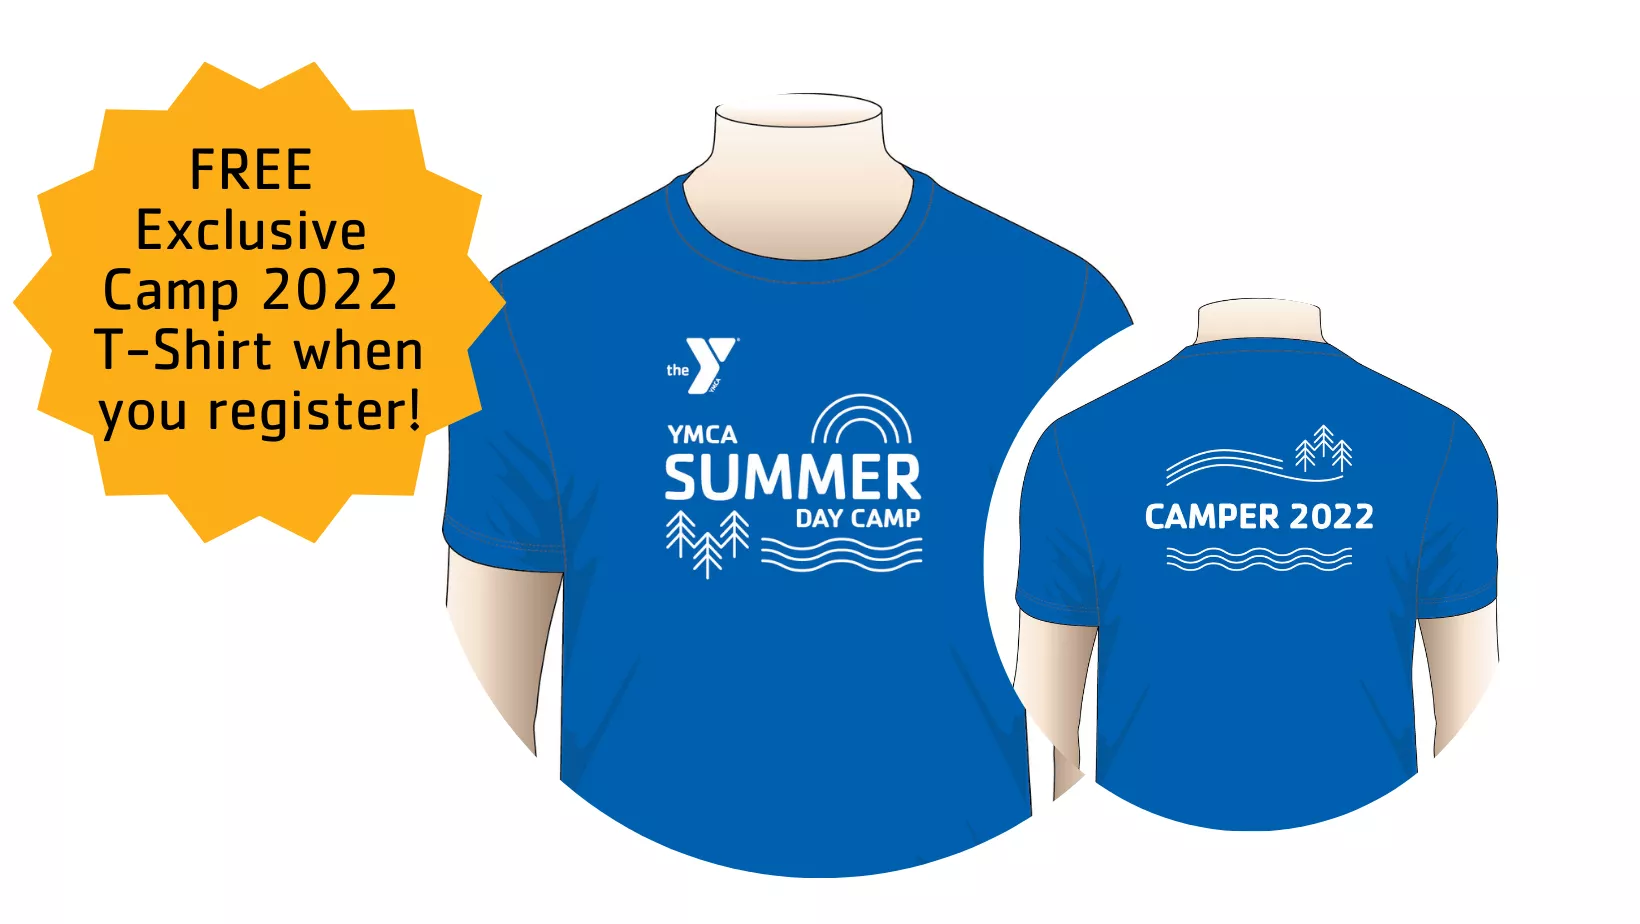 camp 2022 exclusive t-shirt 